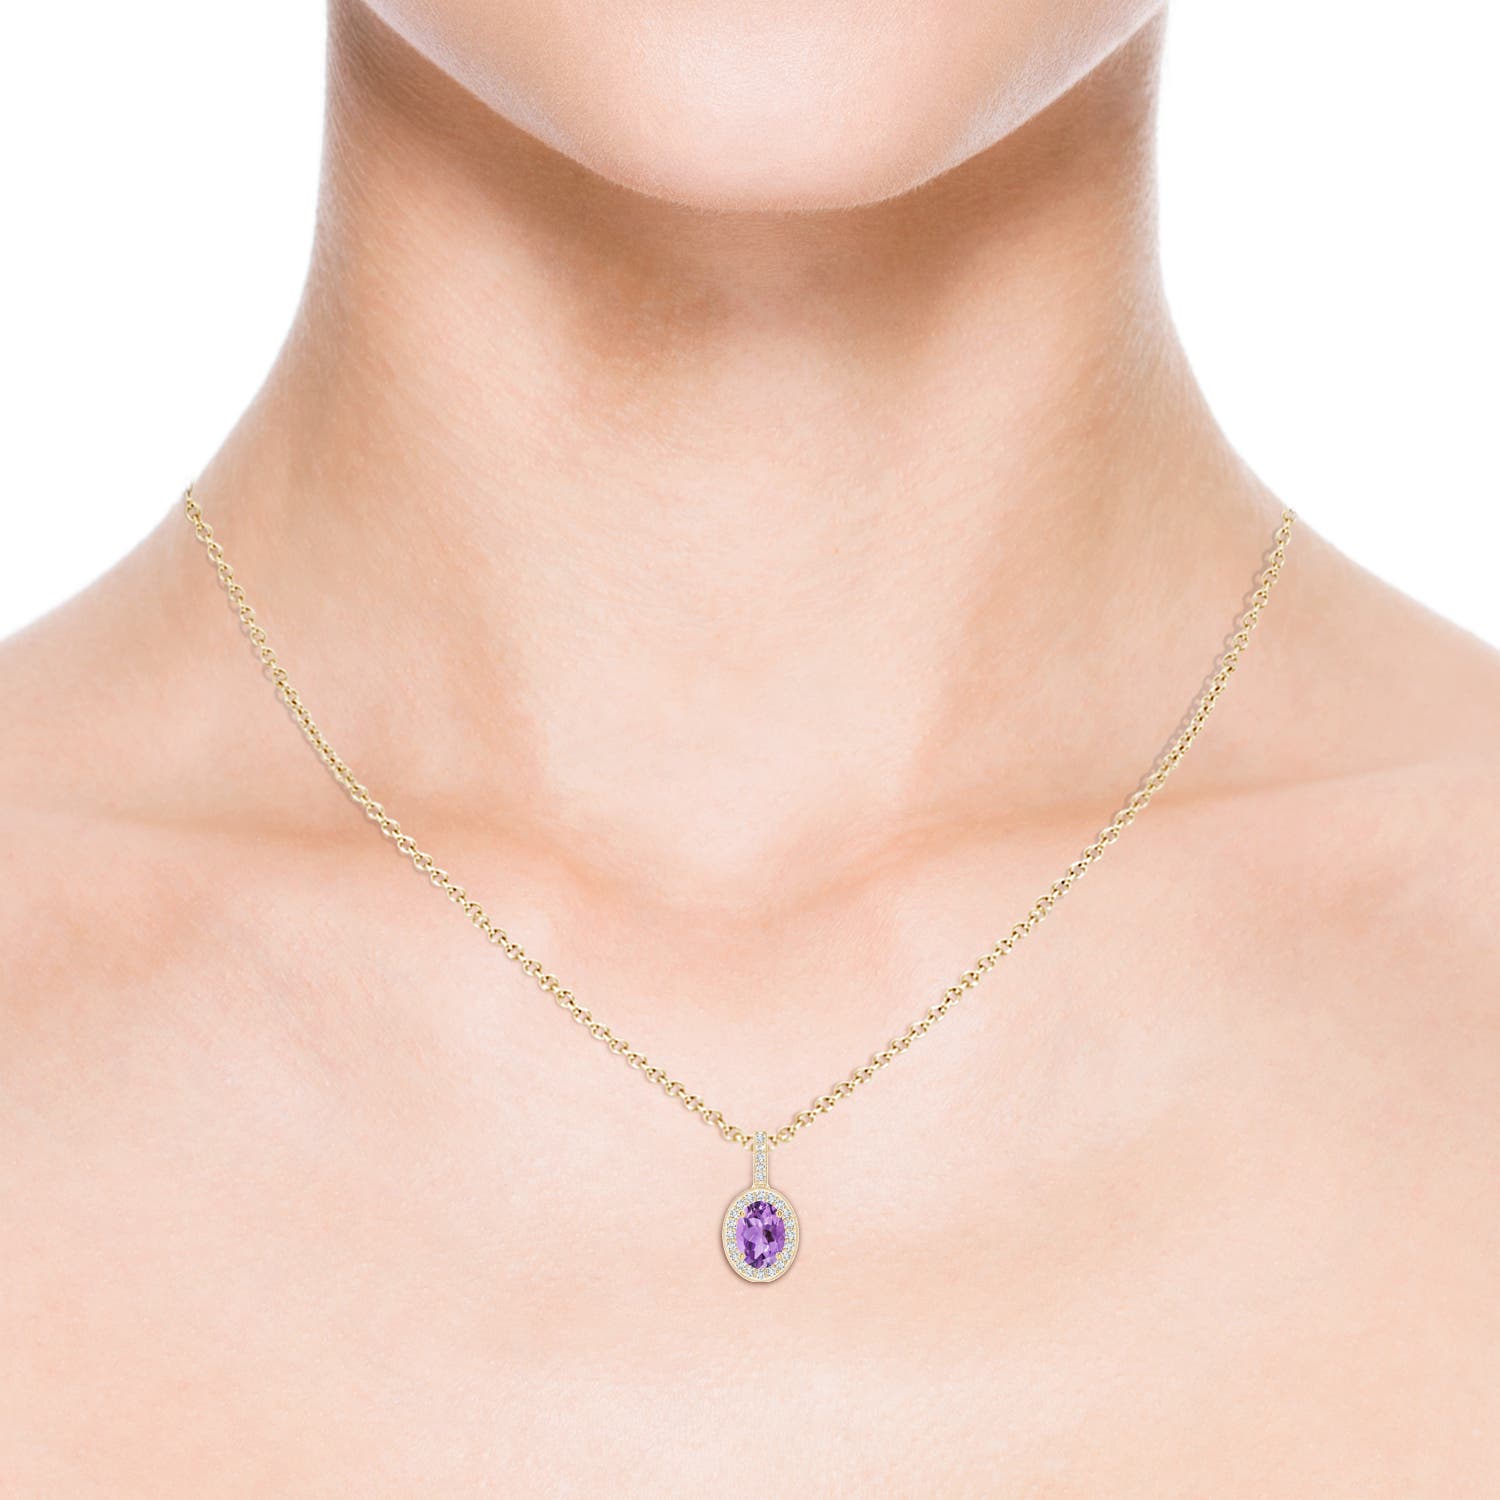 A - Amethyst / 0.82 CT / 14 KT Yellow Gold